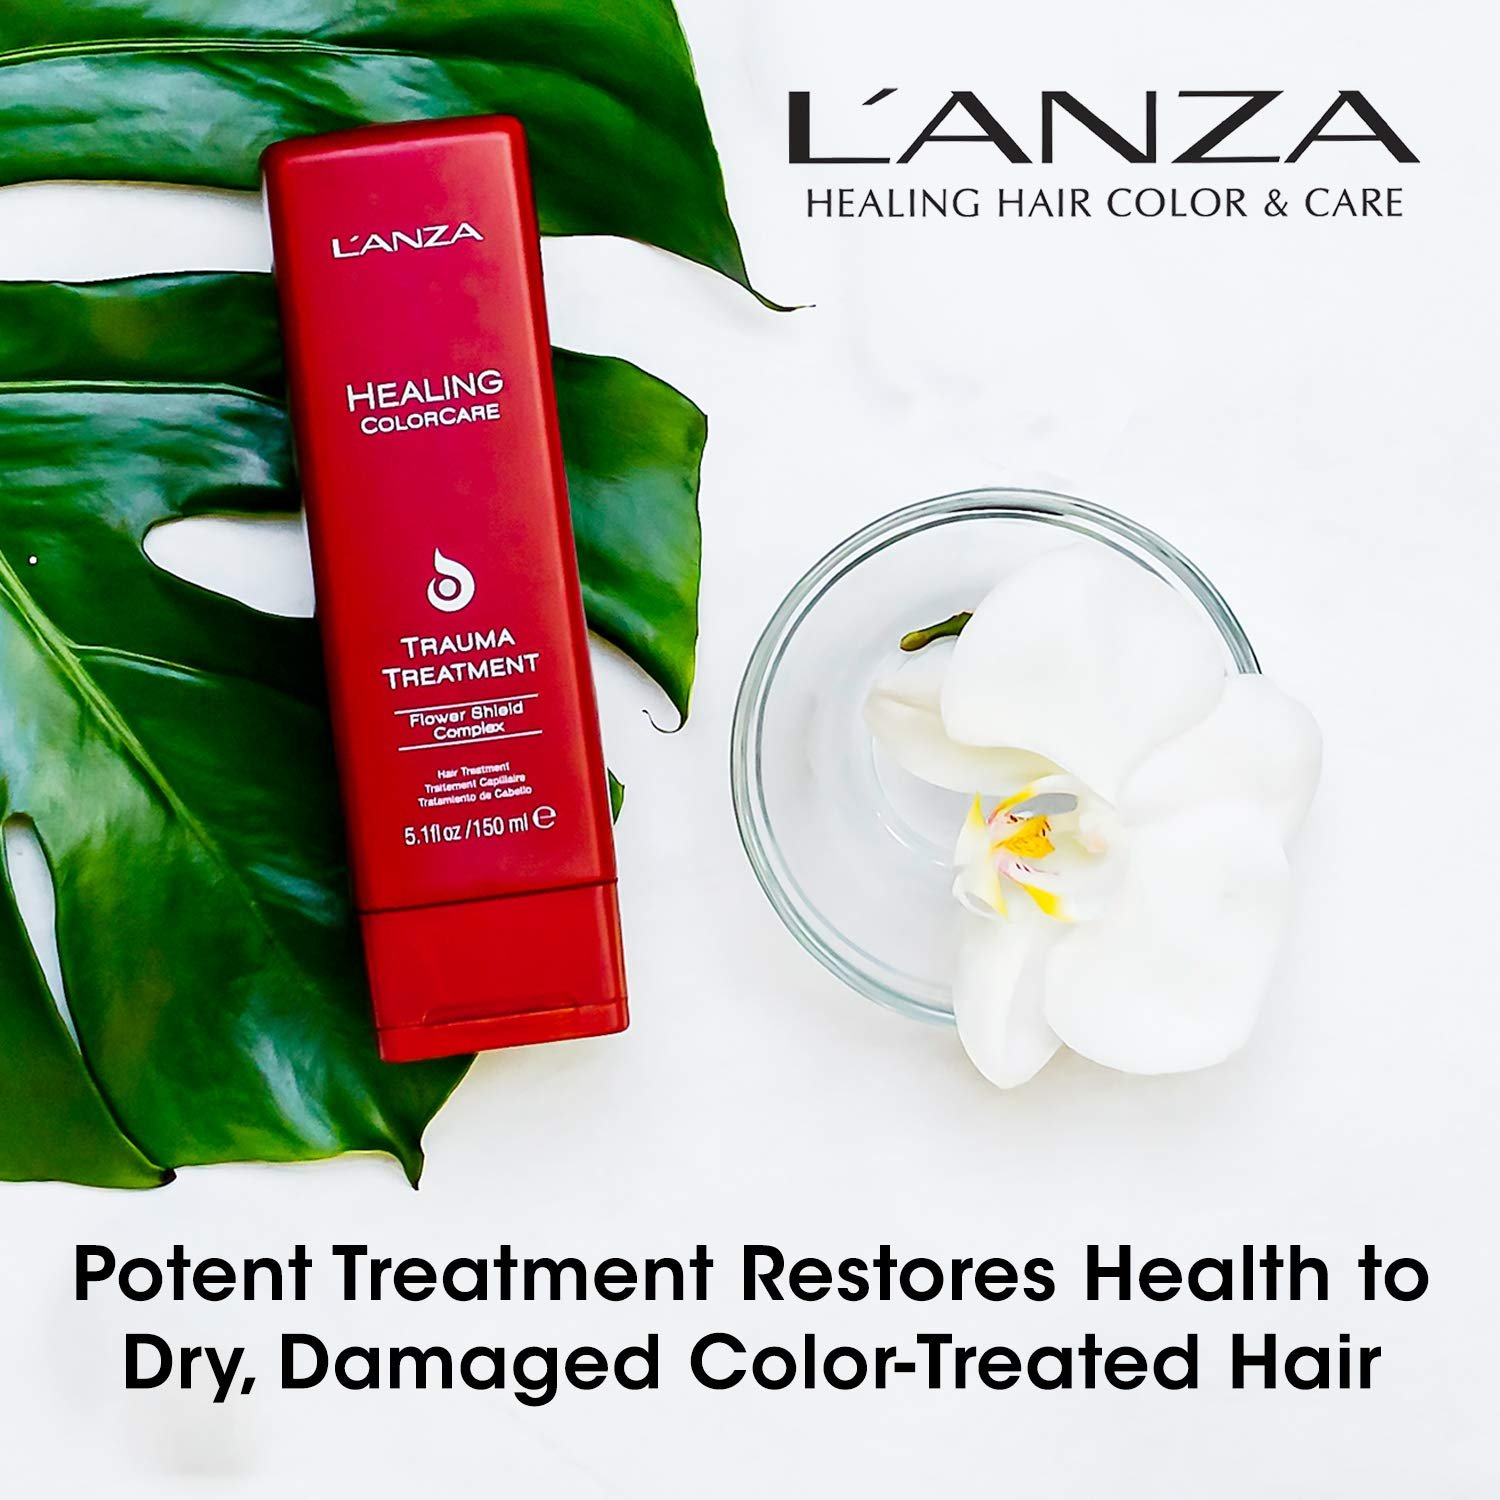 LANZA Healing ColorCare Trauma Treatment, Hair Treatment for Dry Damaged Hair, Extends Color Longevity, For Healthy and Vibrant Color with Split End Repair  Hair Shine, Luxury Hair Care